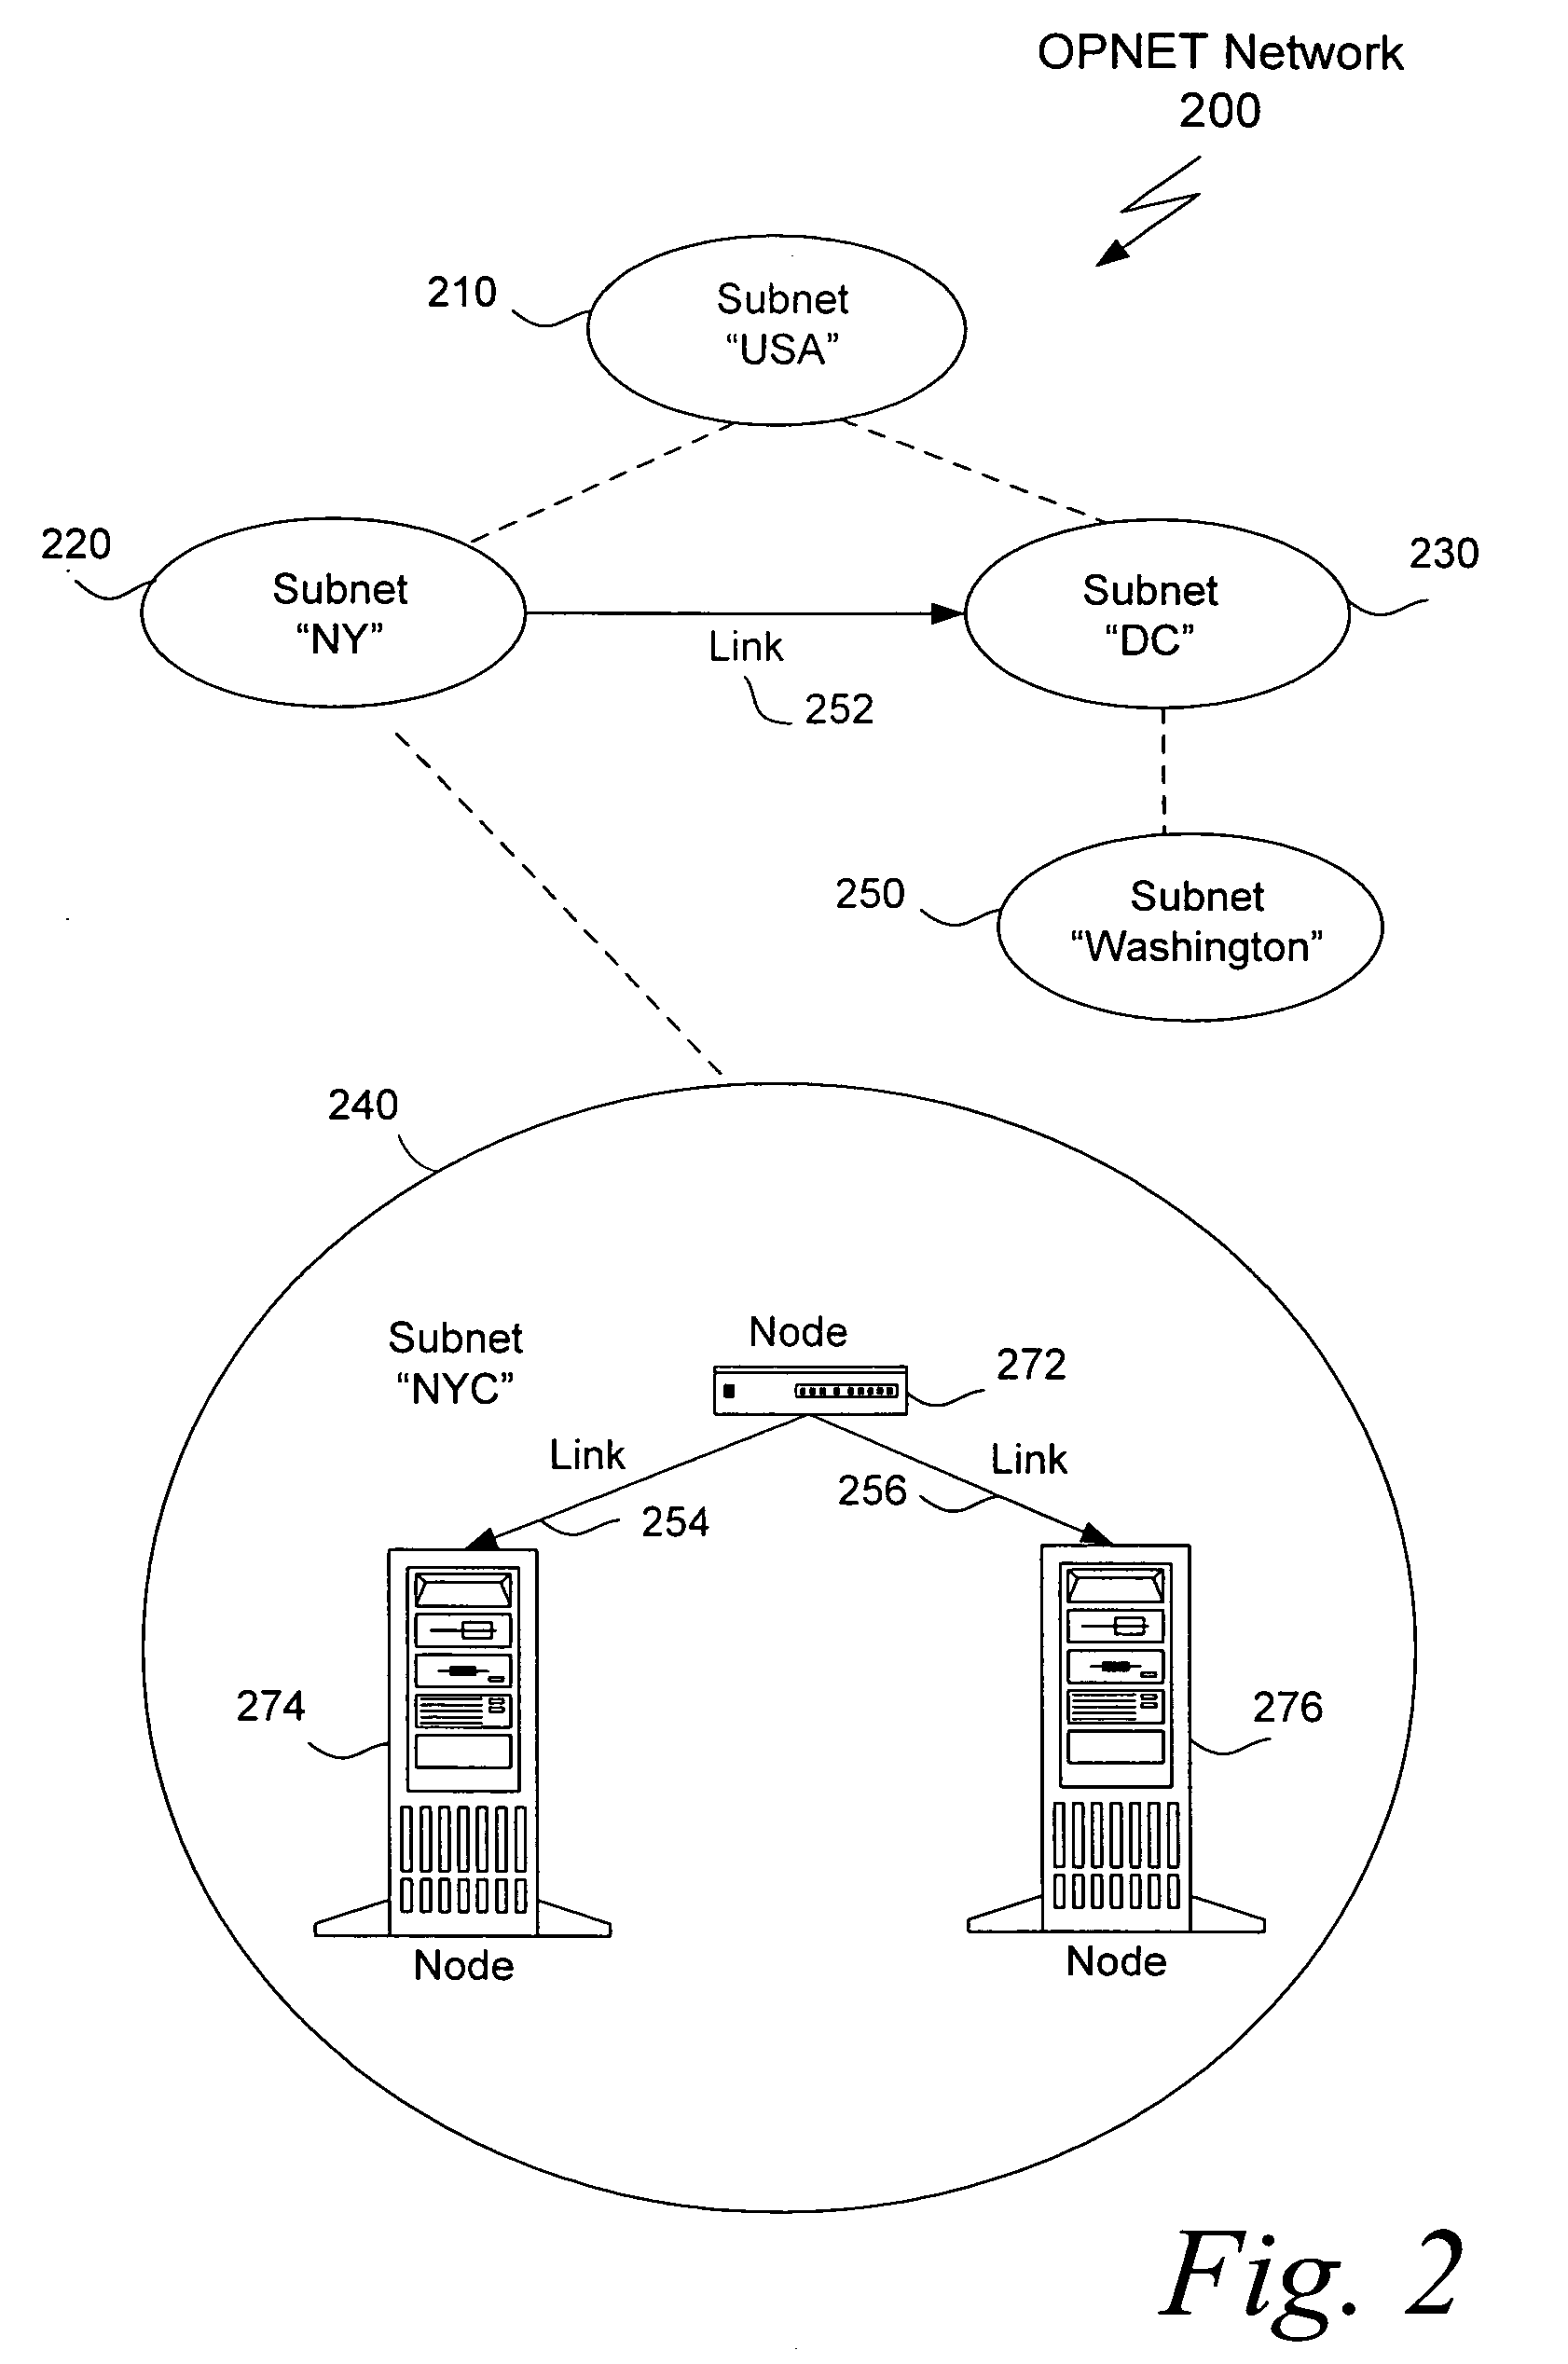 Method and apparatus for providing an interface between system architect and OPNET